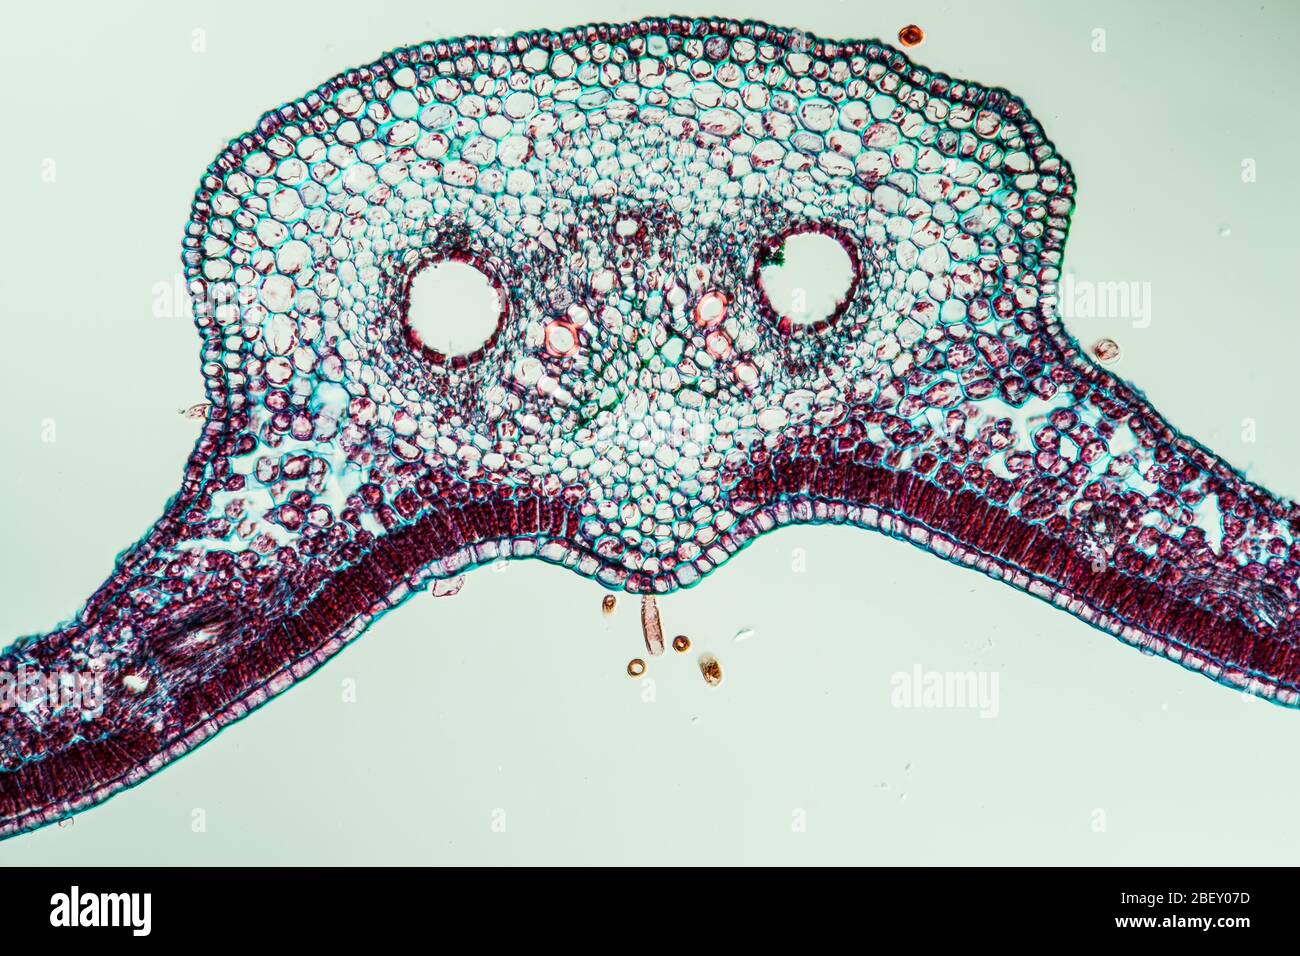 Ivy leaf in cross section 100x Stock Photo - Alamy